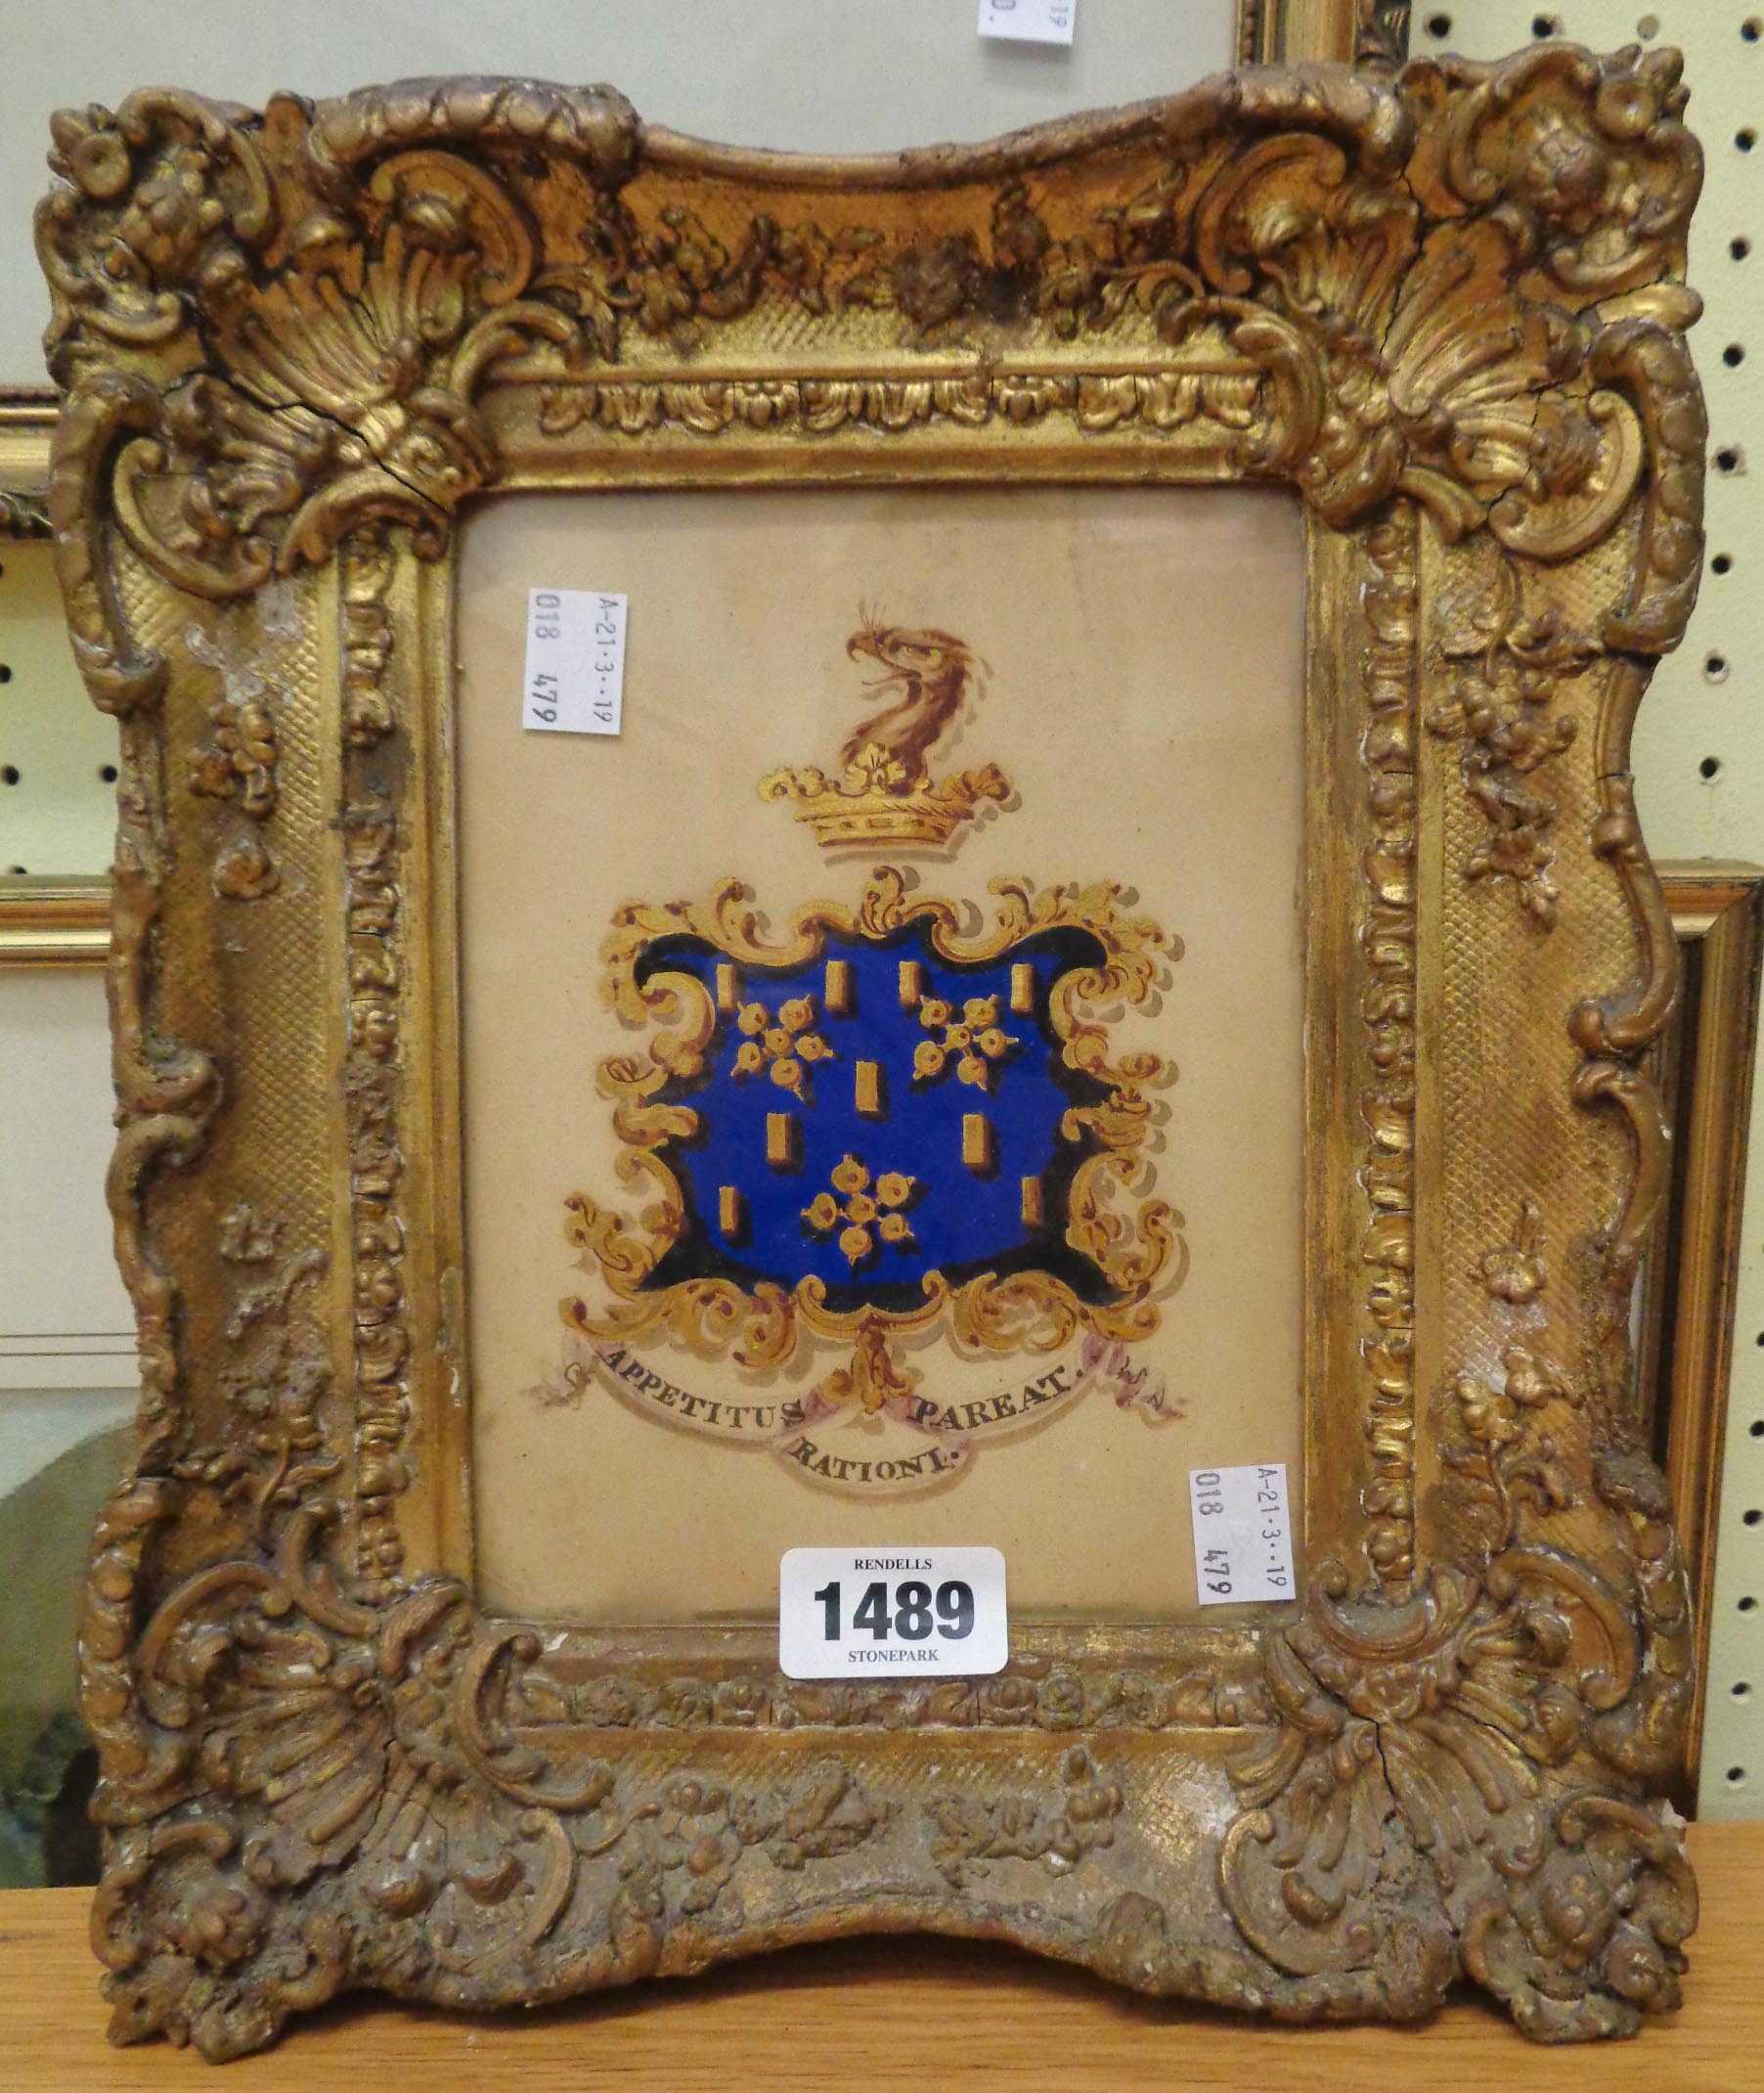 An antique ornate gilt gesso framed heraldic emblem painted in watercolours with gilding - 7 1/2"